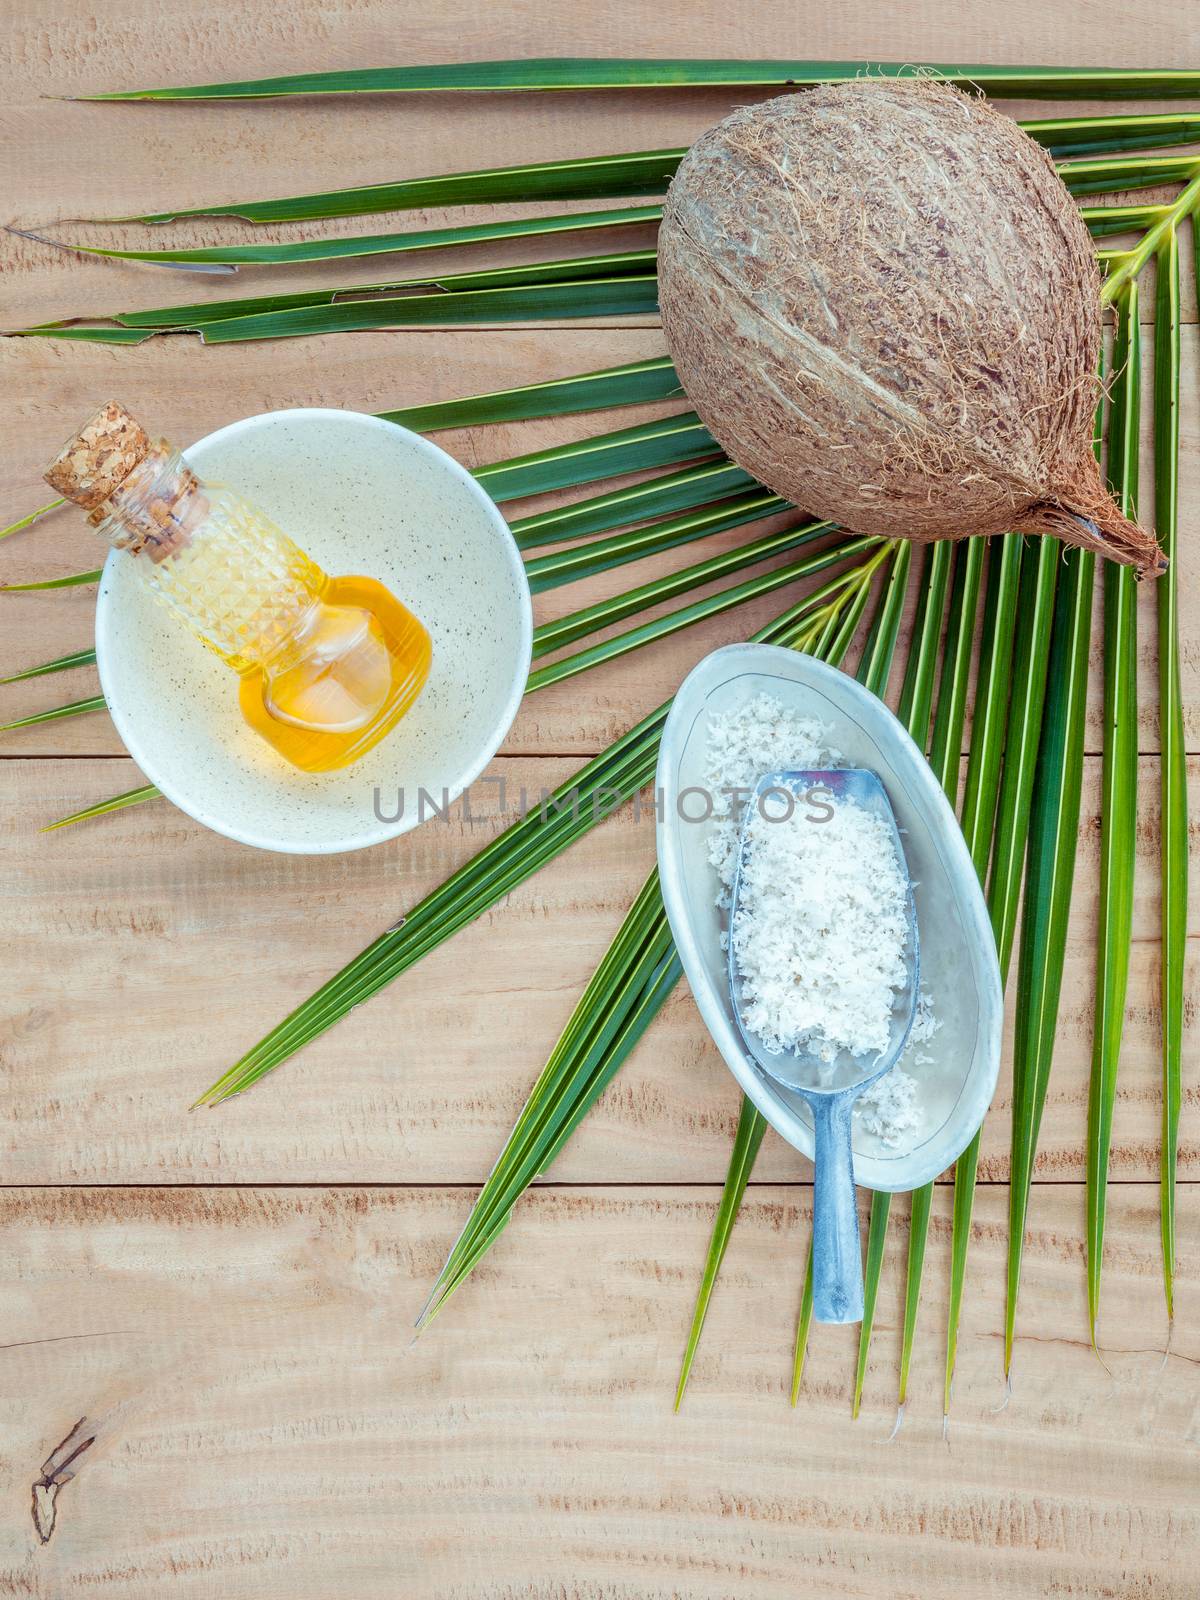 Coconut oil , coconut powder and coconut on coconut leaves set up on brown wooden background for alternative therapy.